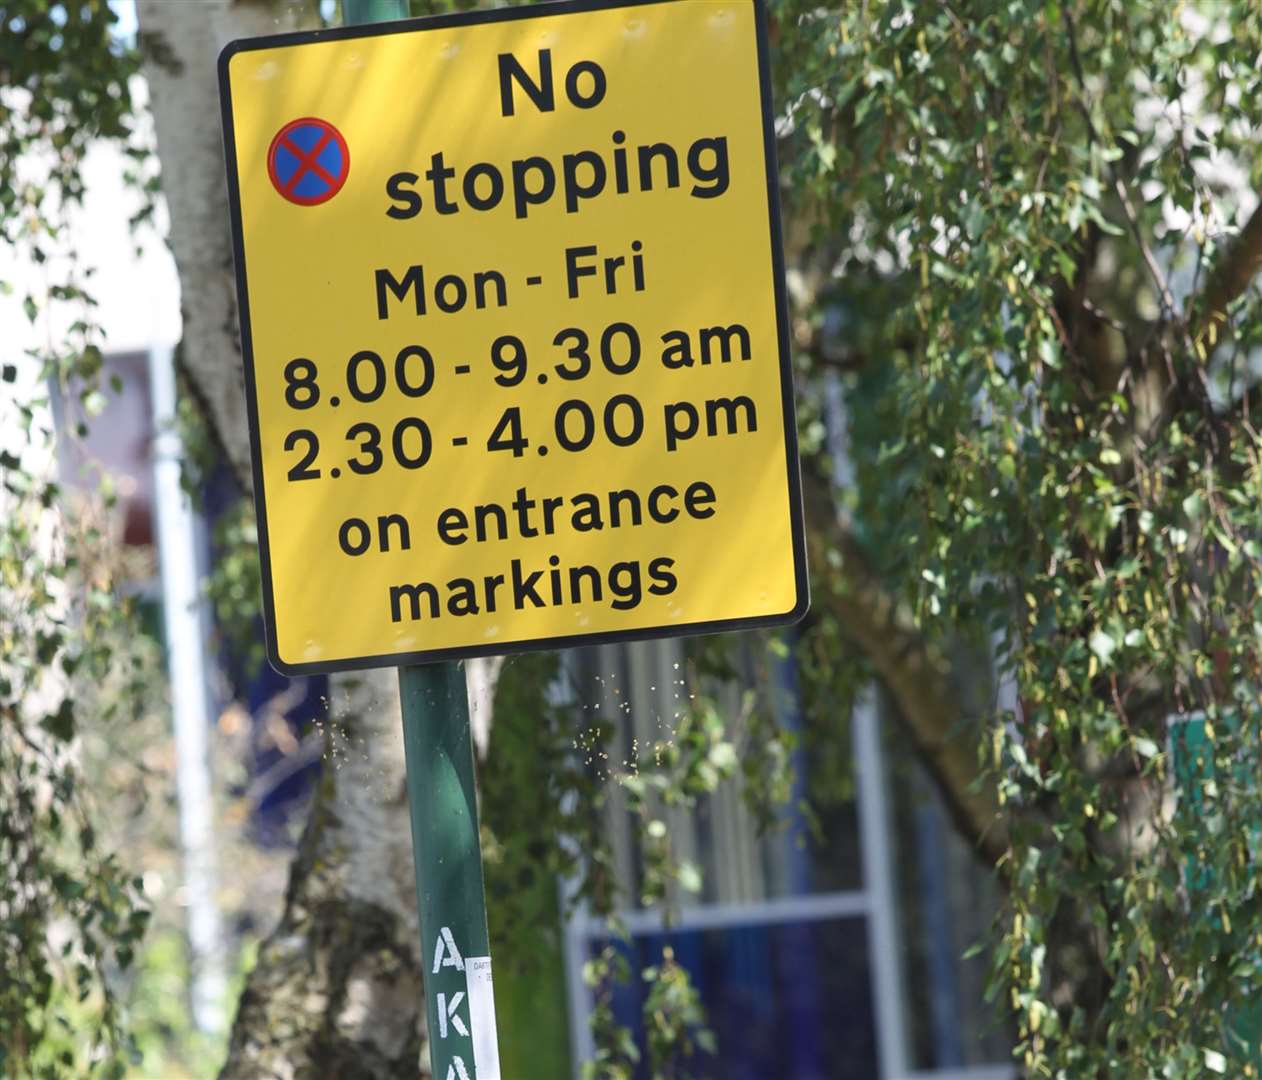 A keep clear sign is clearly visible outside Manor Community school Picture by: John Westhrop